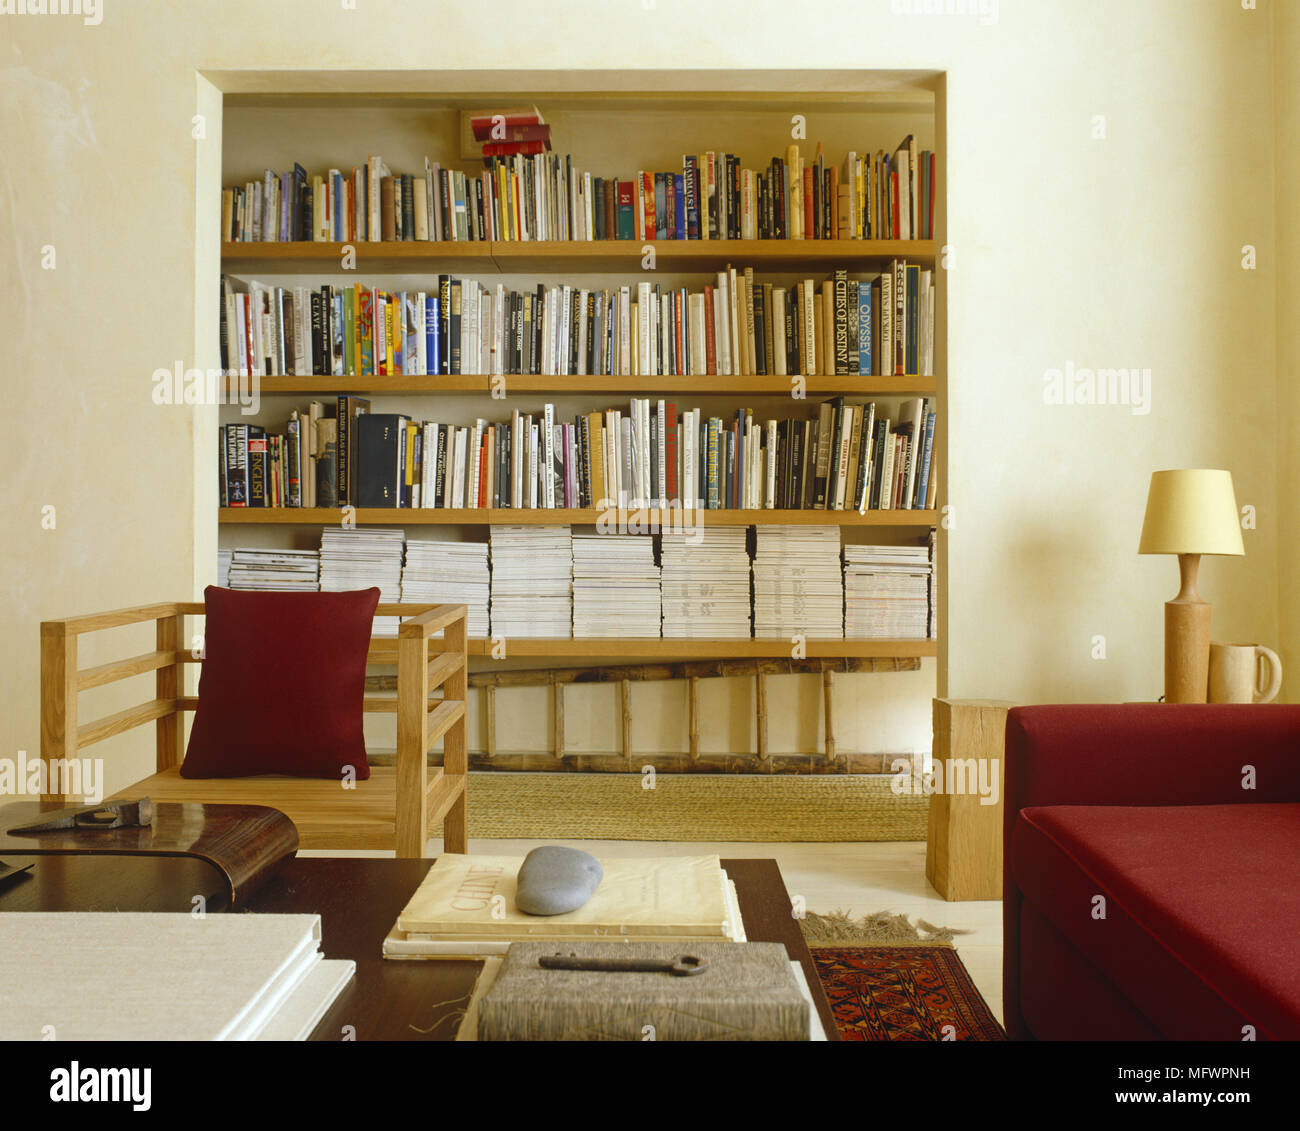 Bookshelf Unit Set Into Wall Behind Armchair With Red Cushion And